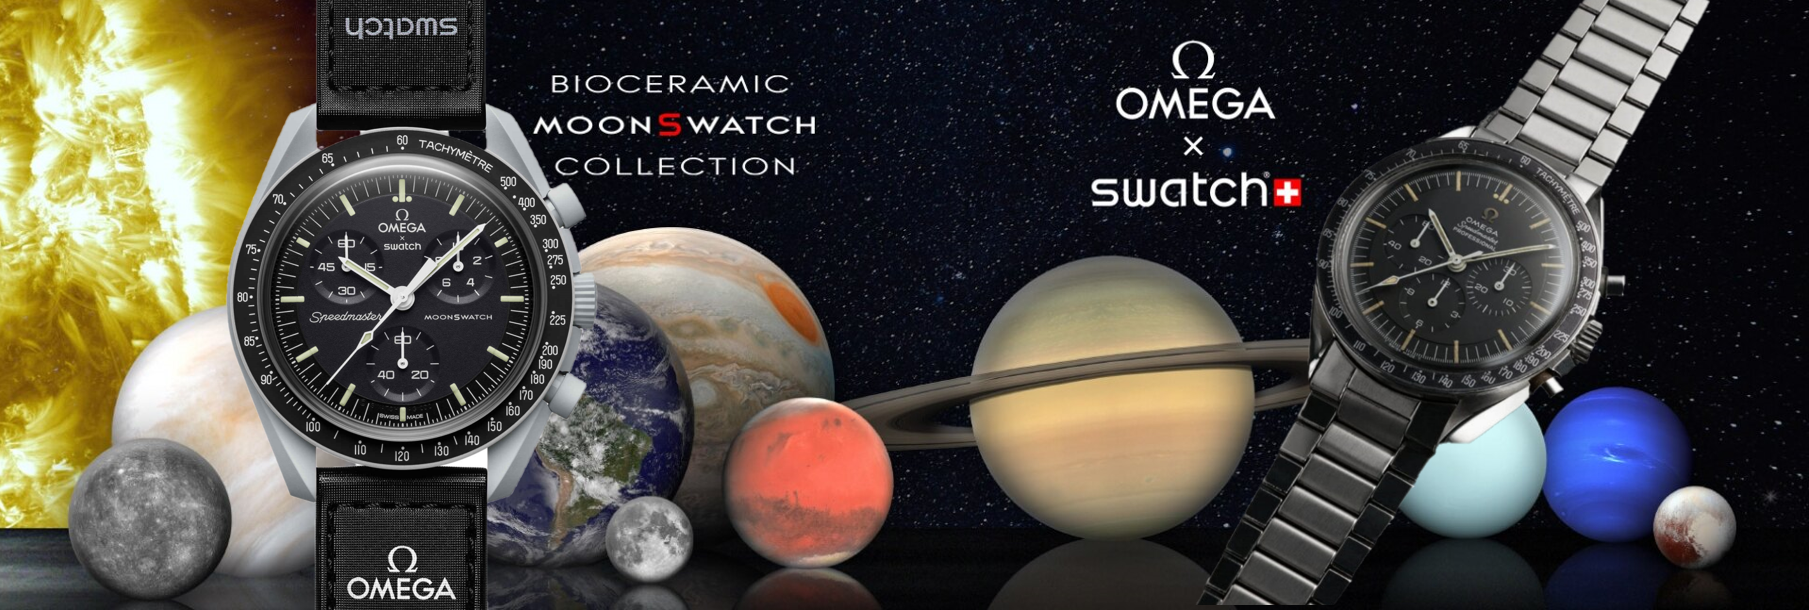 Omega x Swatch MoonSwatch is one of 2022's biggest collabs - The Hindu